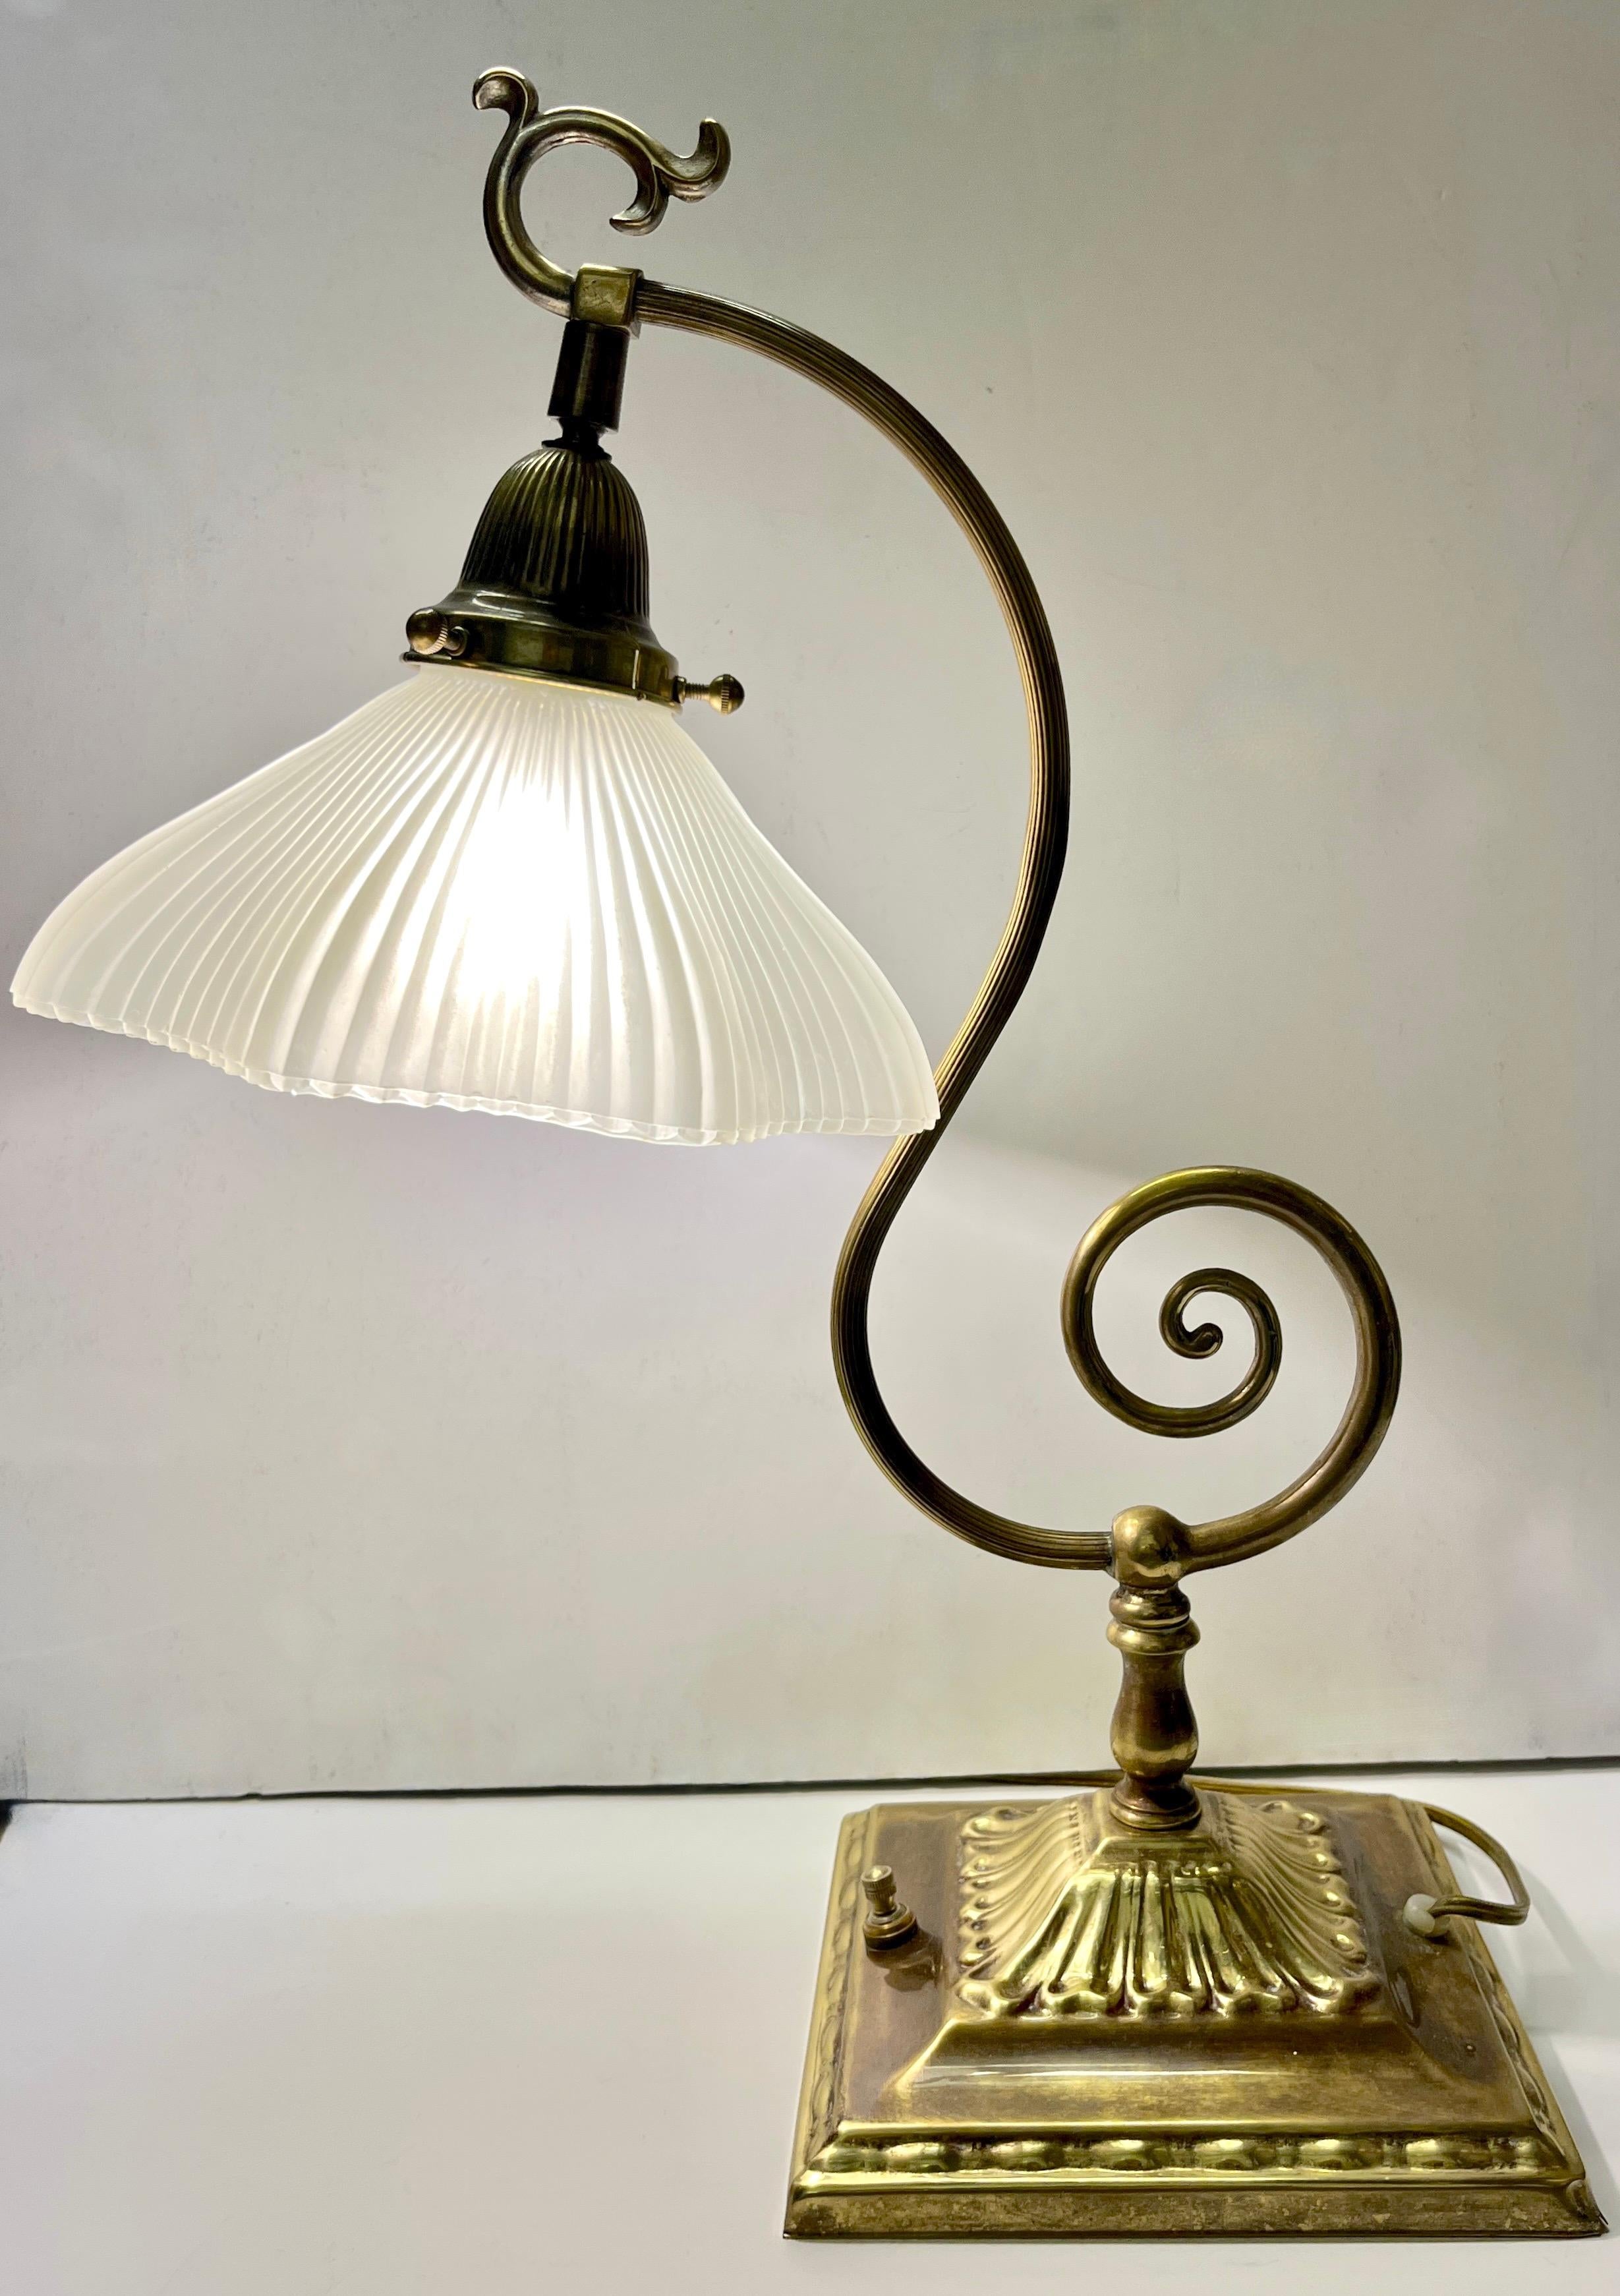 A vintage brass table or desk lamp with an enticing design, the stepped square base (6.75